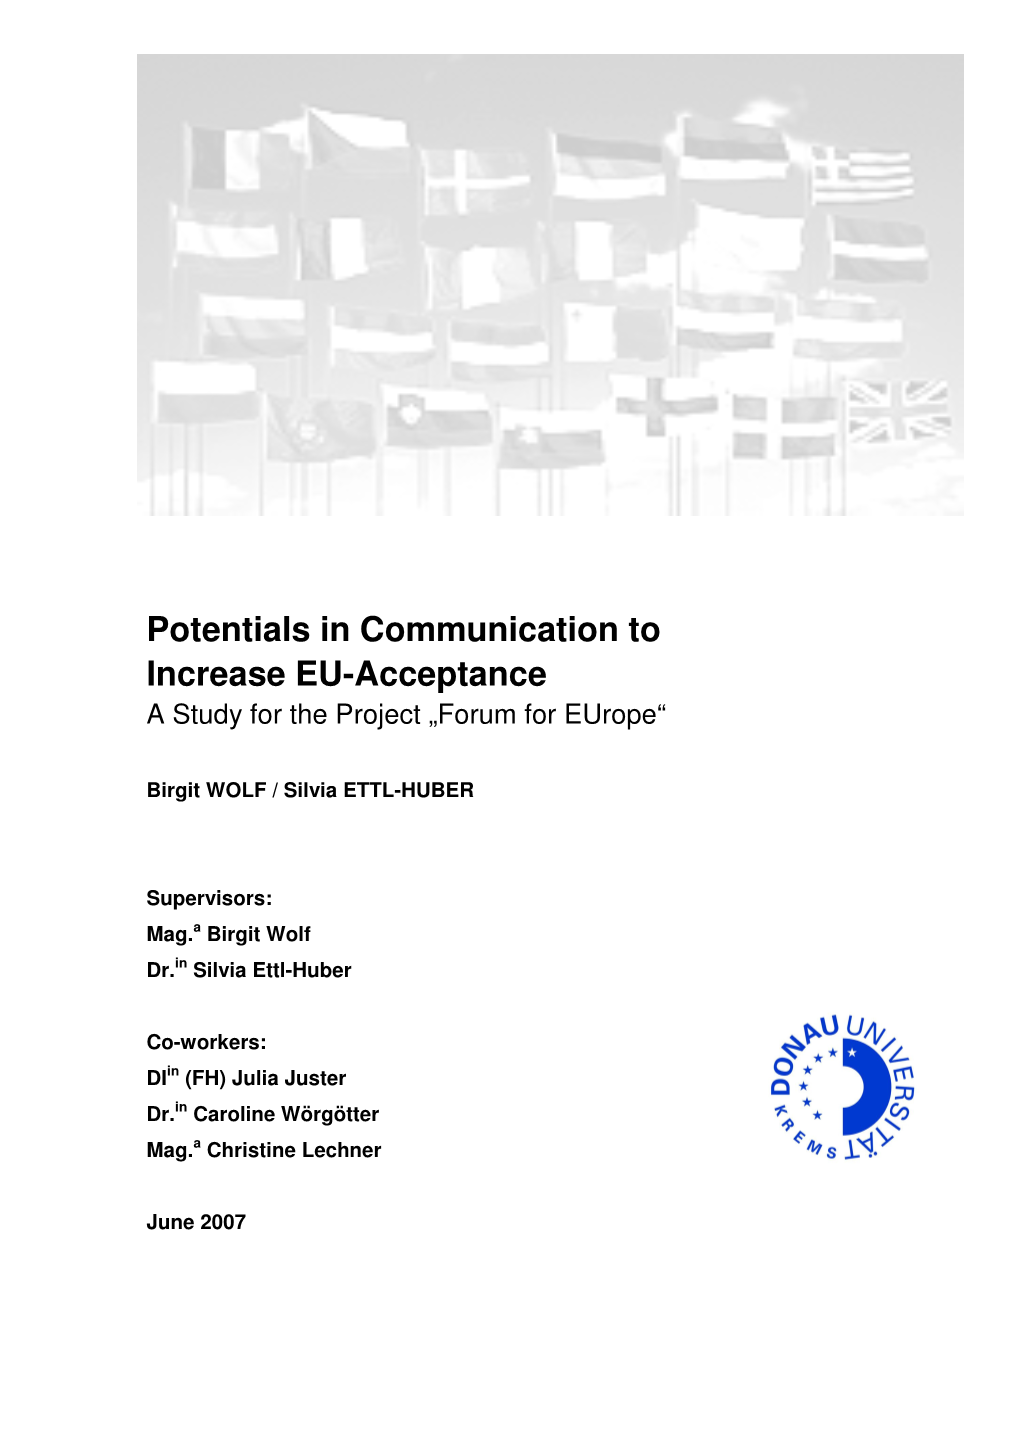 Potentials in Communication to Increase EU-Acceptance a Study for the Project „Forum for Europe“